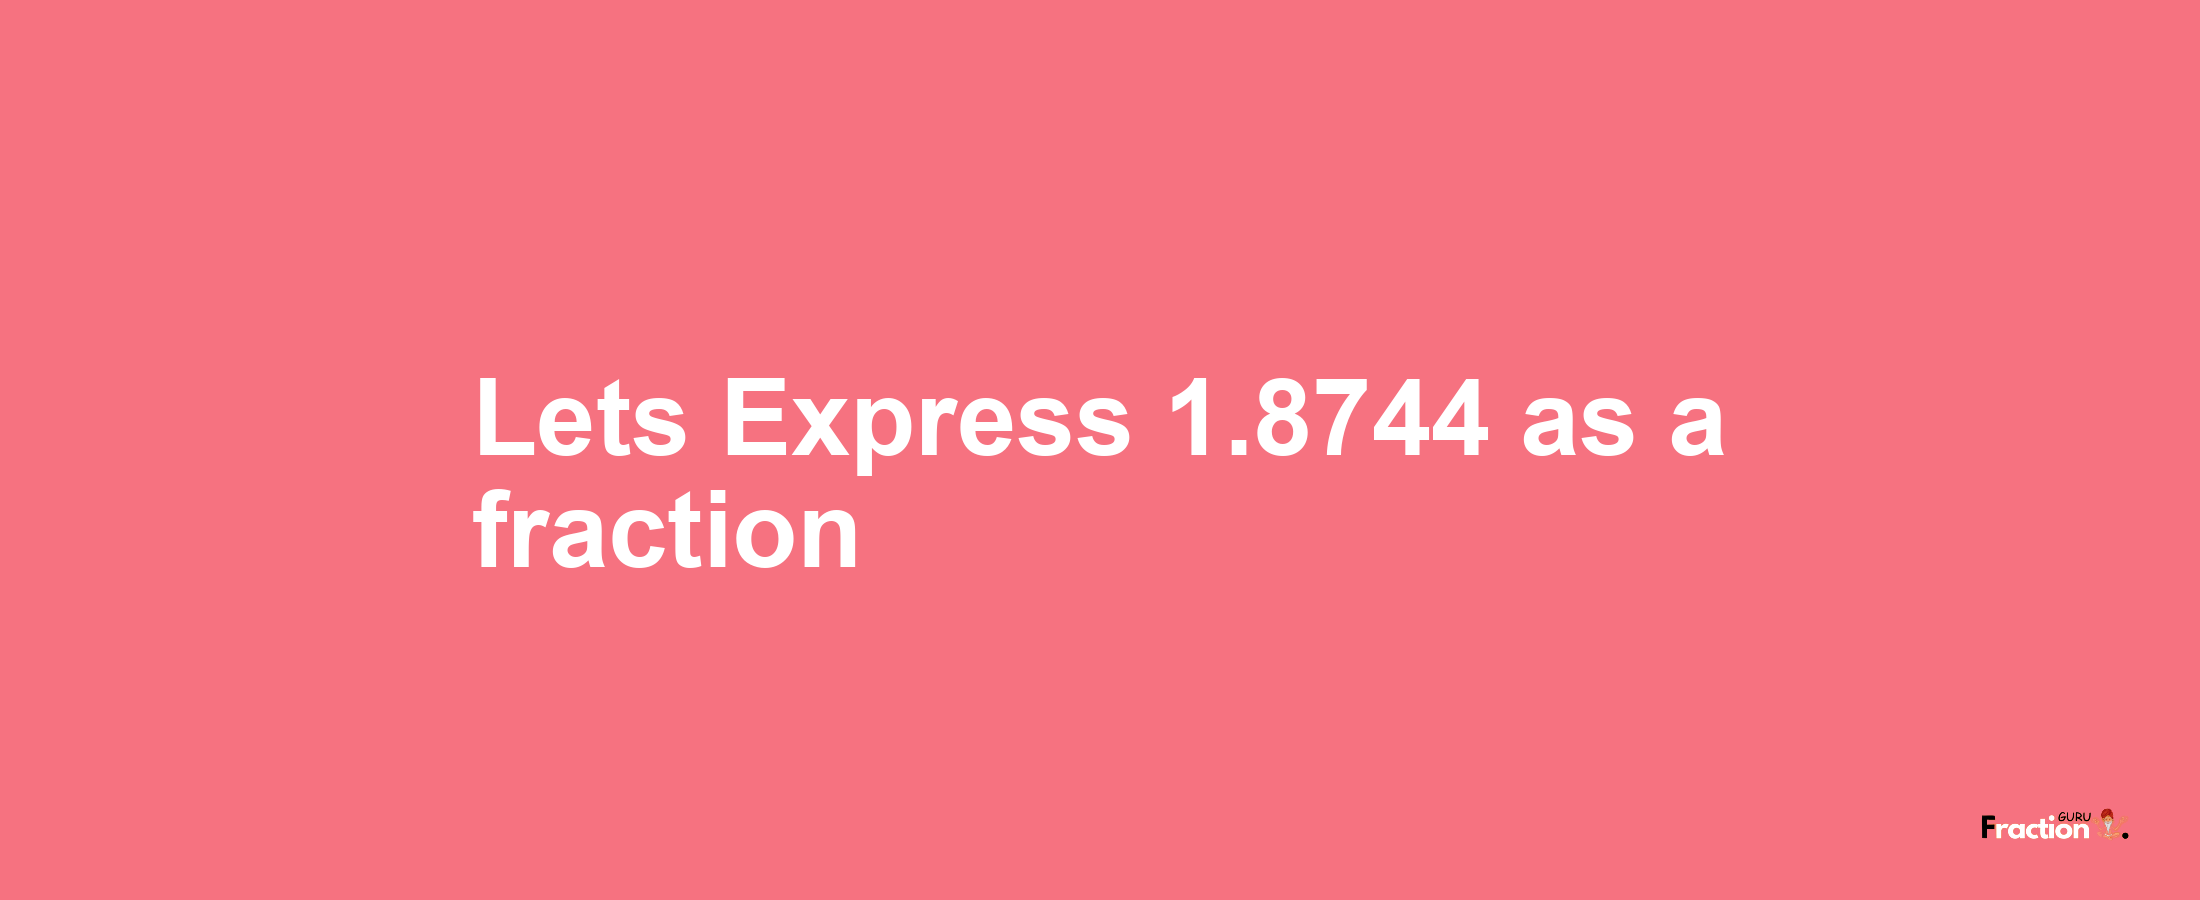 Lets Express 1.8744 as afraction